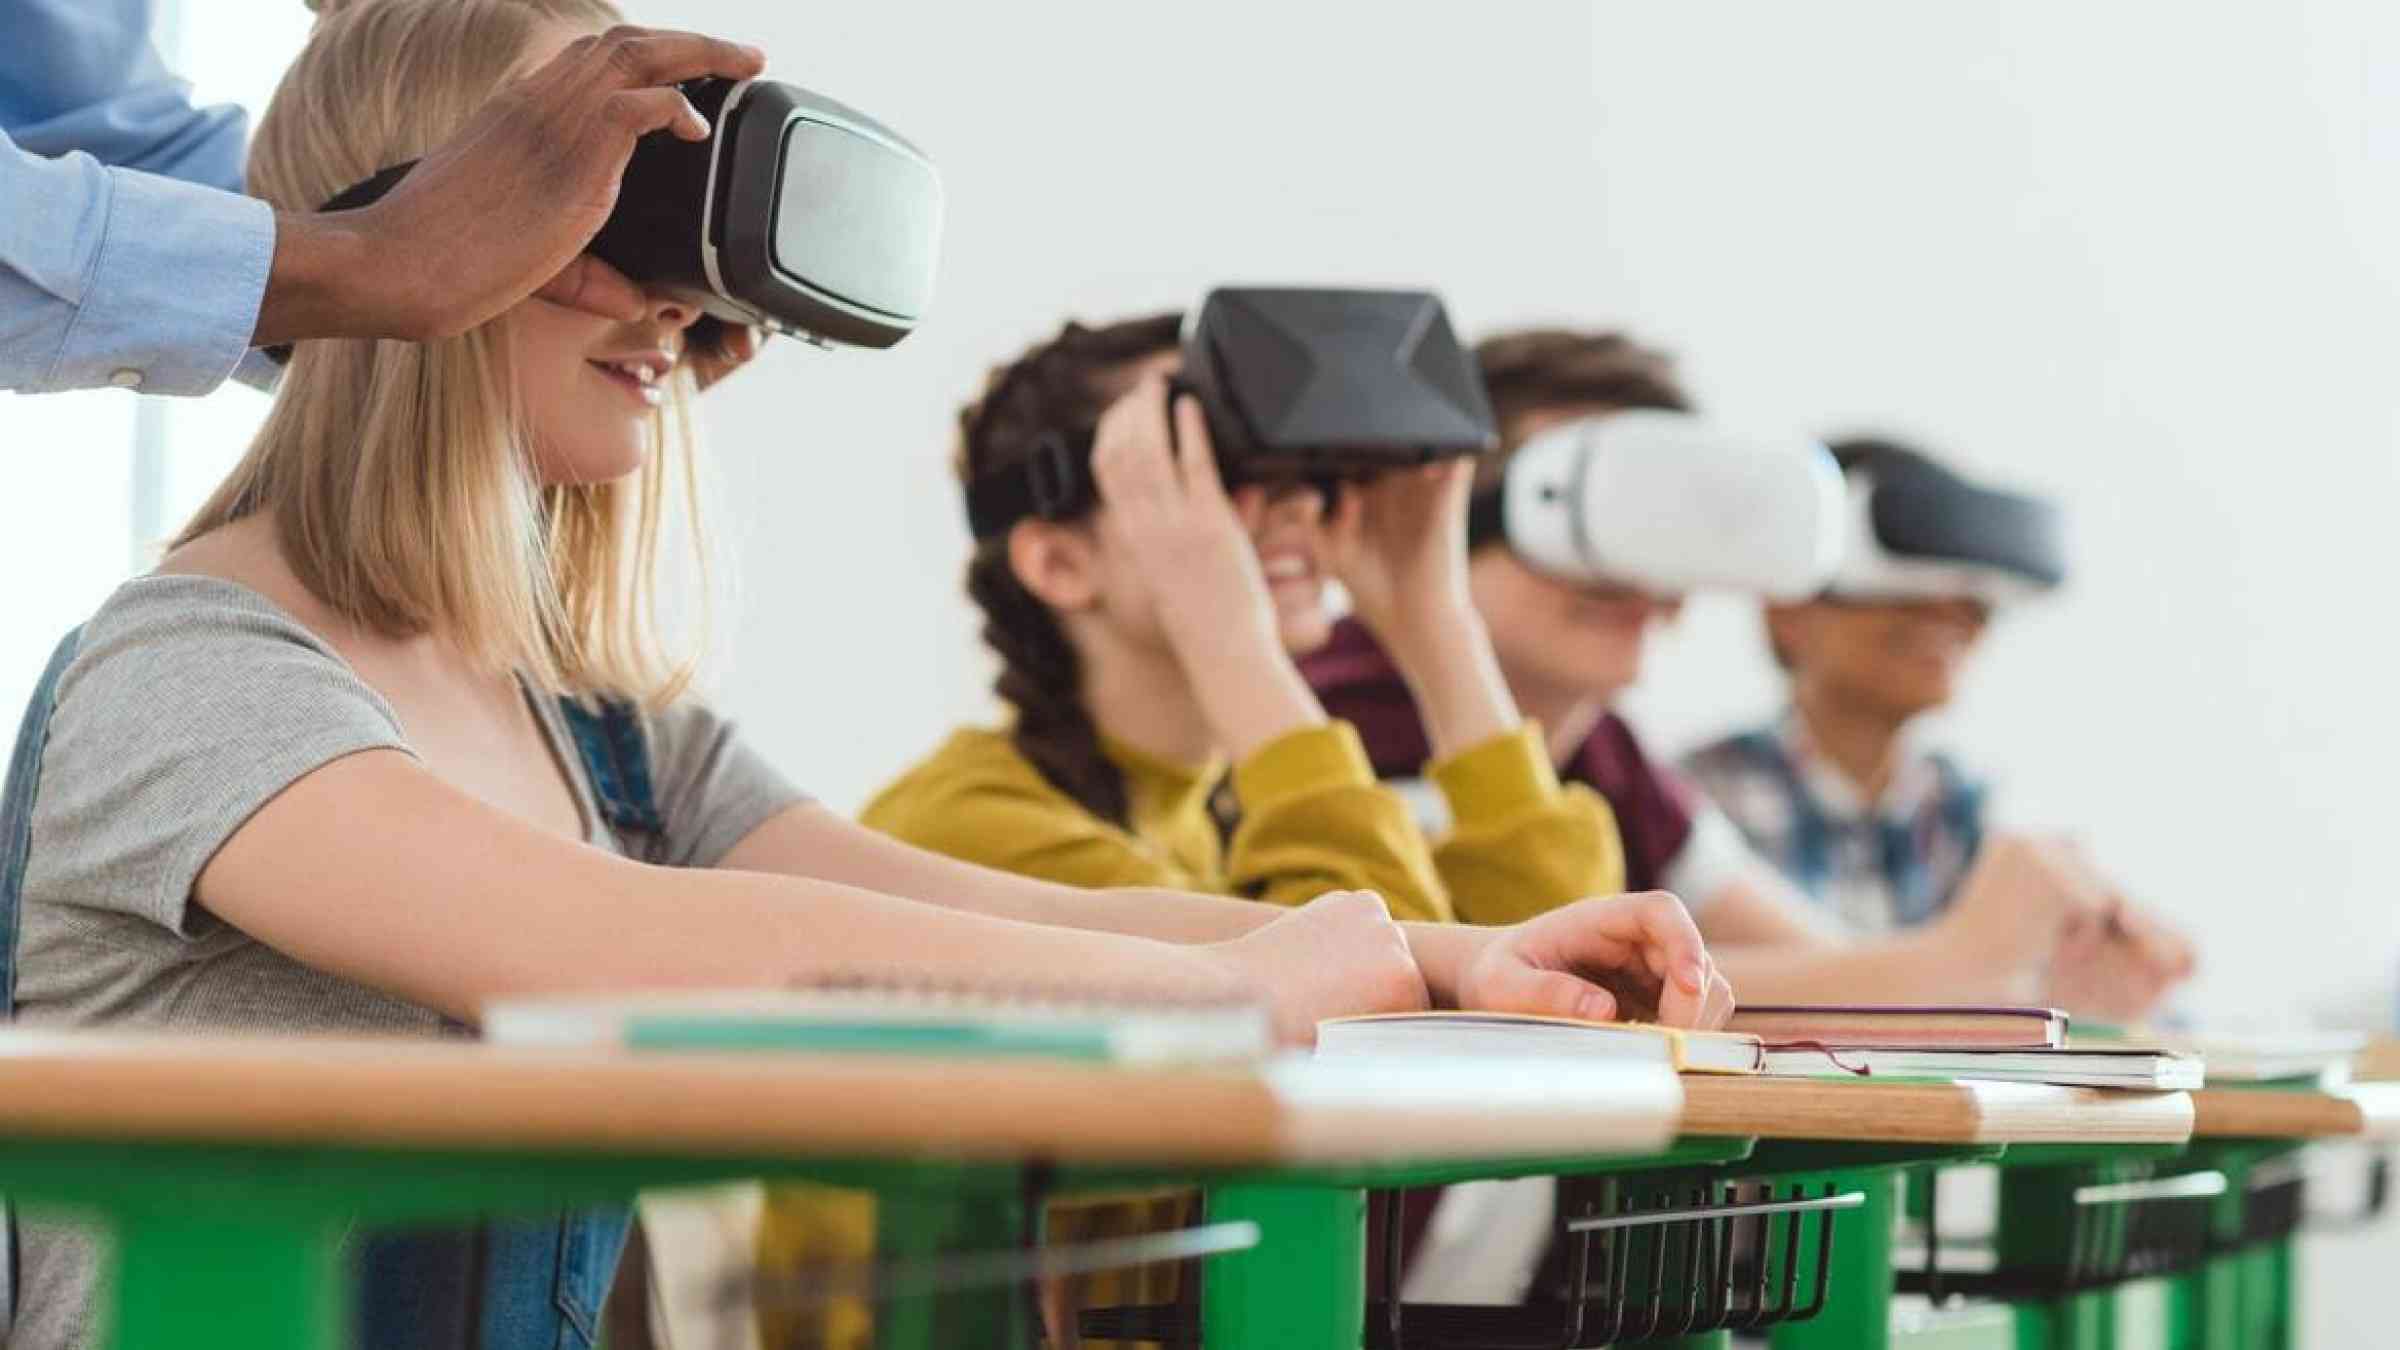 Children wearing virtual reality devices